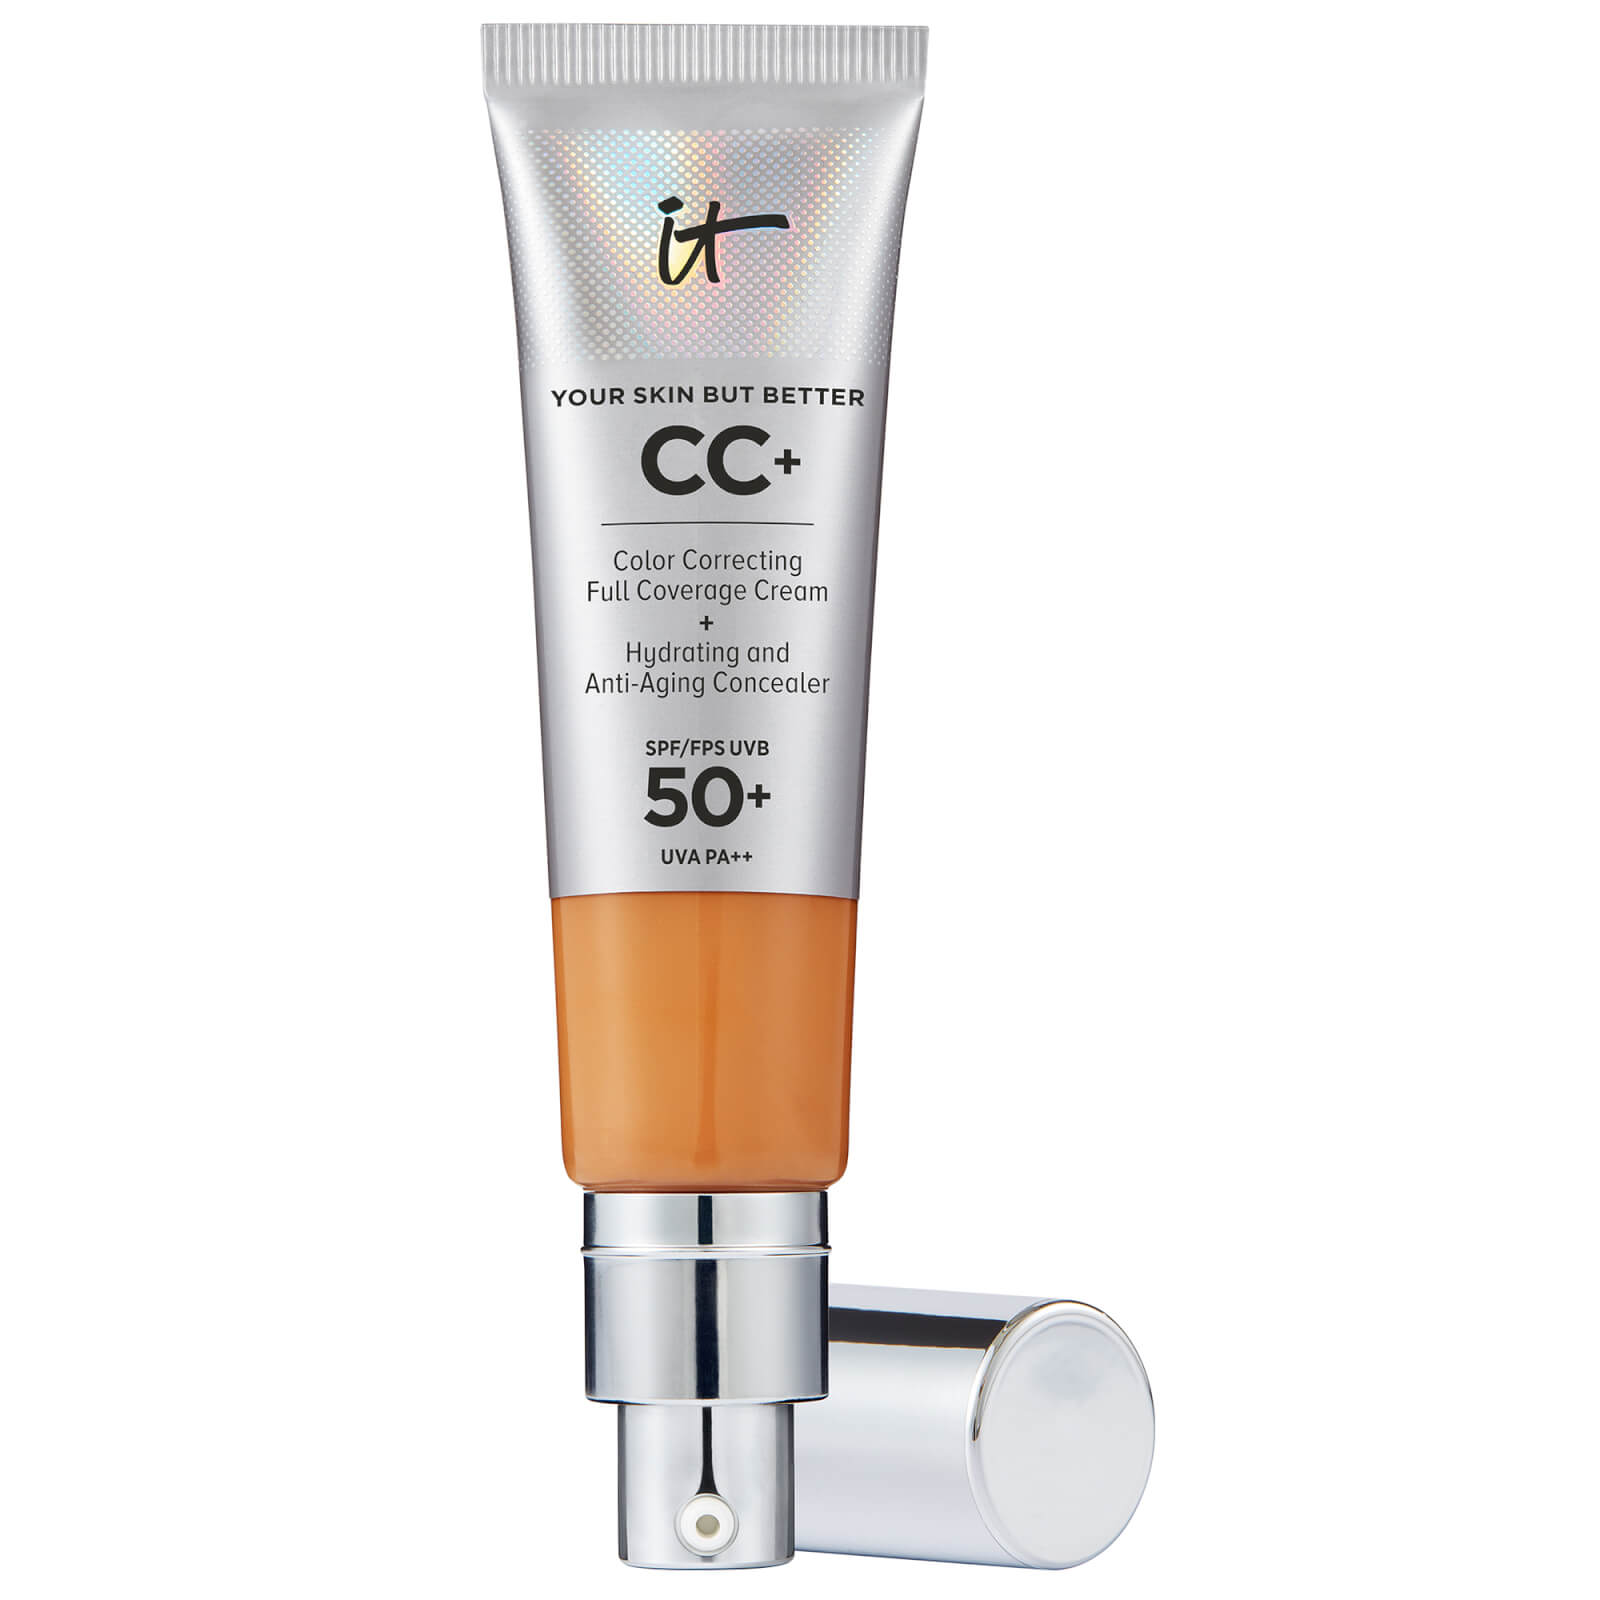 IT Cosmetics Your Skin But Better CC+ Cream with SPF50 32ml (Various Shades) - Tan Rich